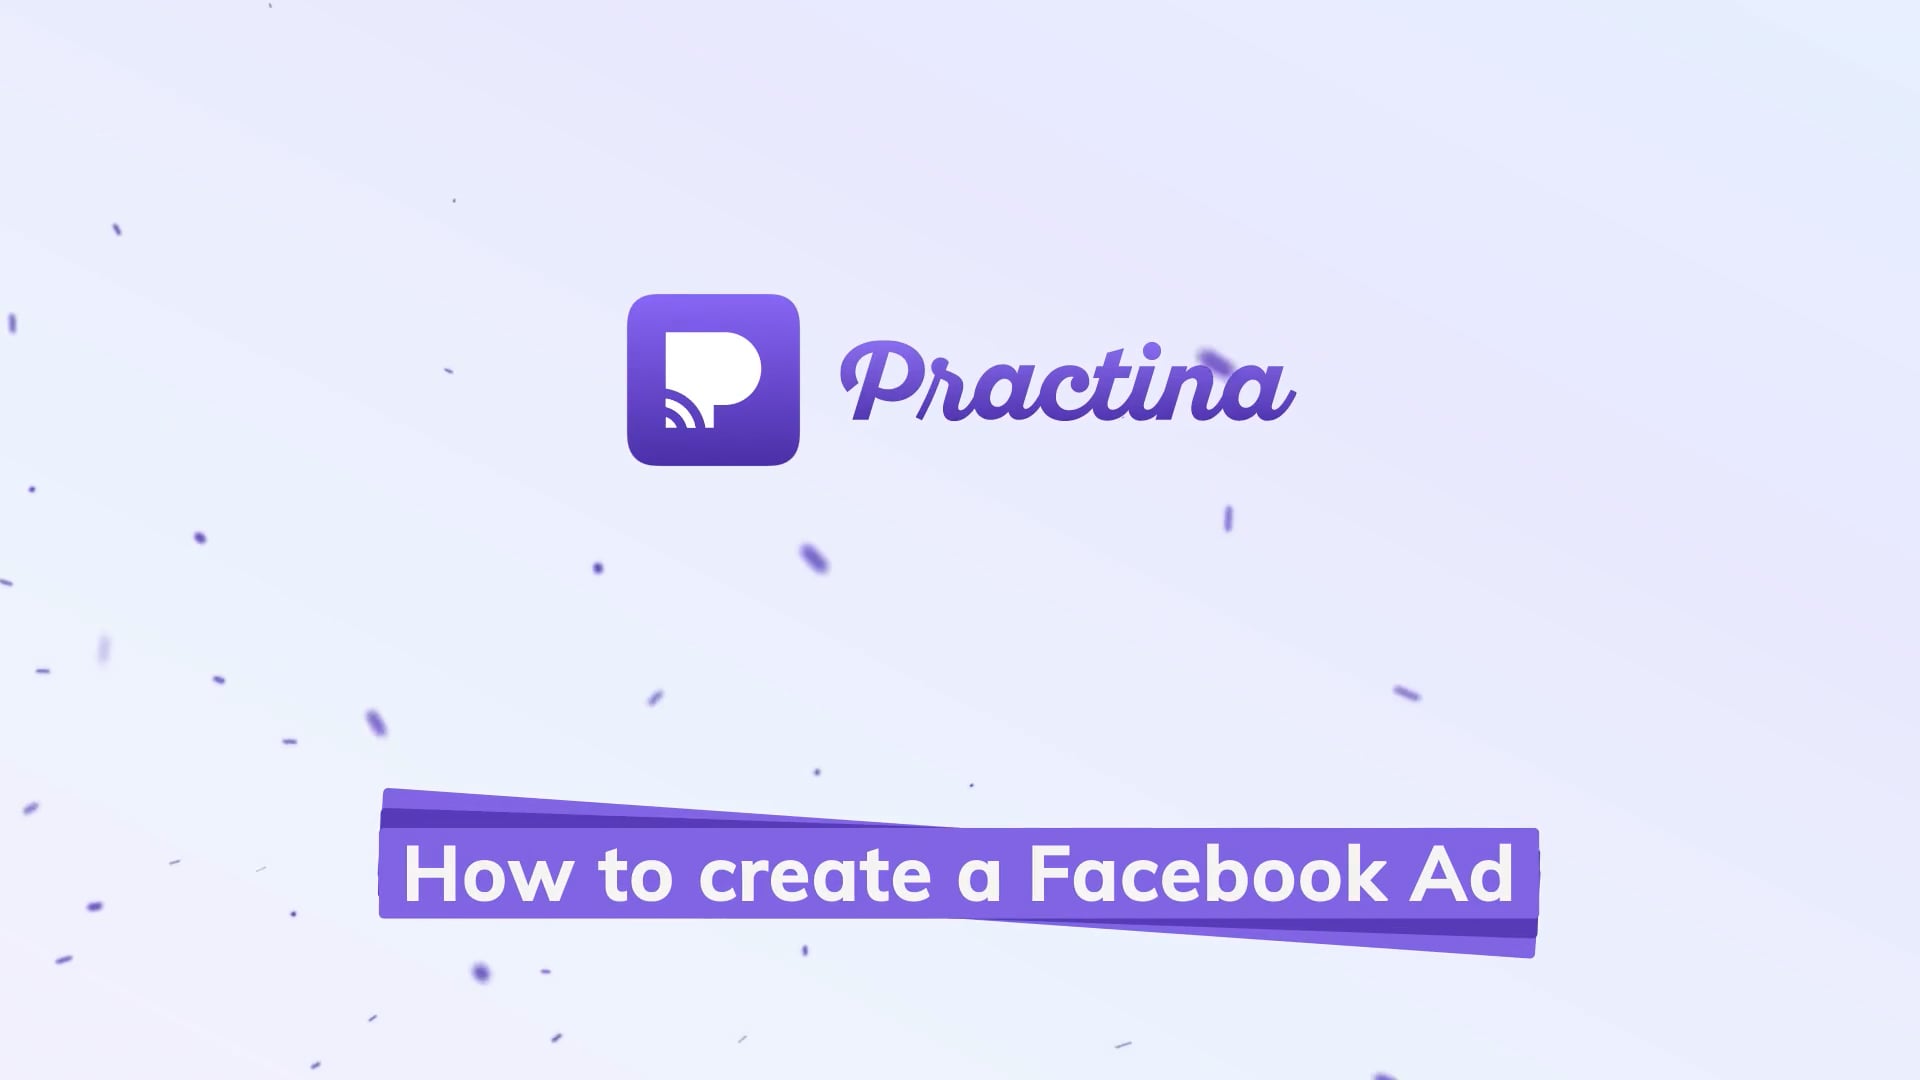 How to create a Facebook Ad using Practina